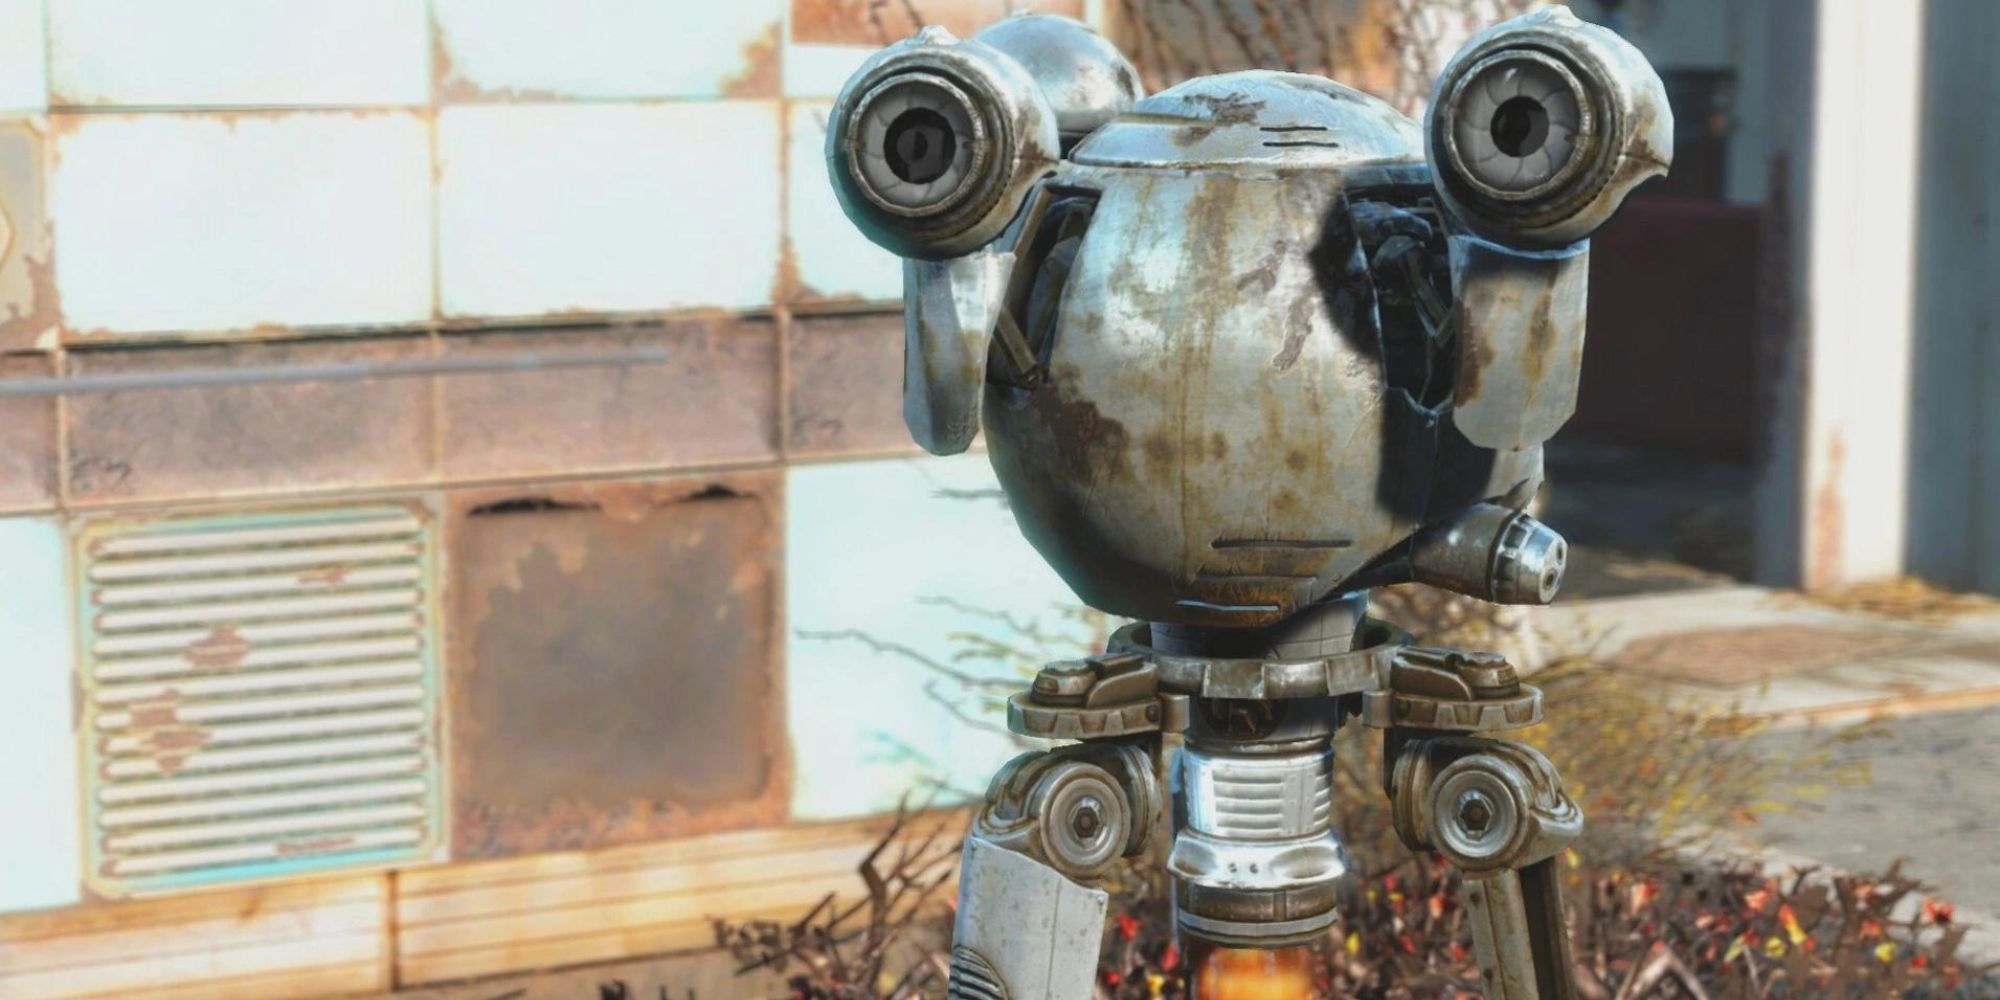 A close up of Codsworth from Fallout 4